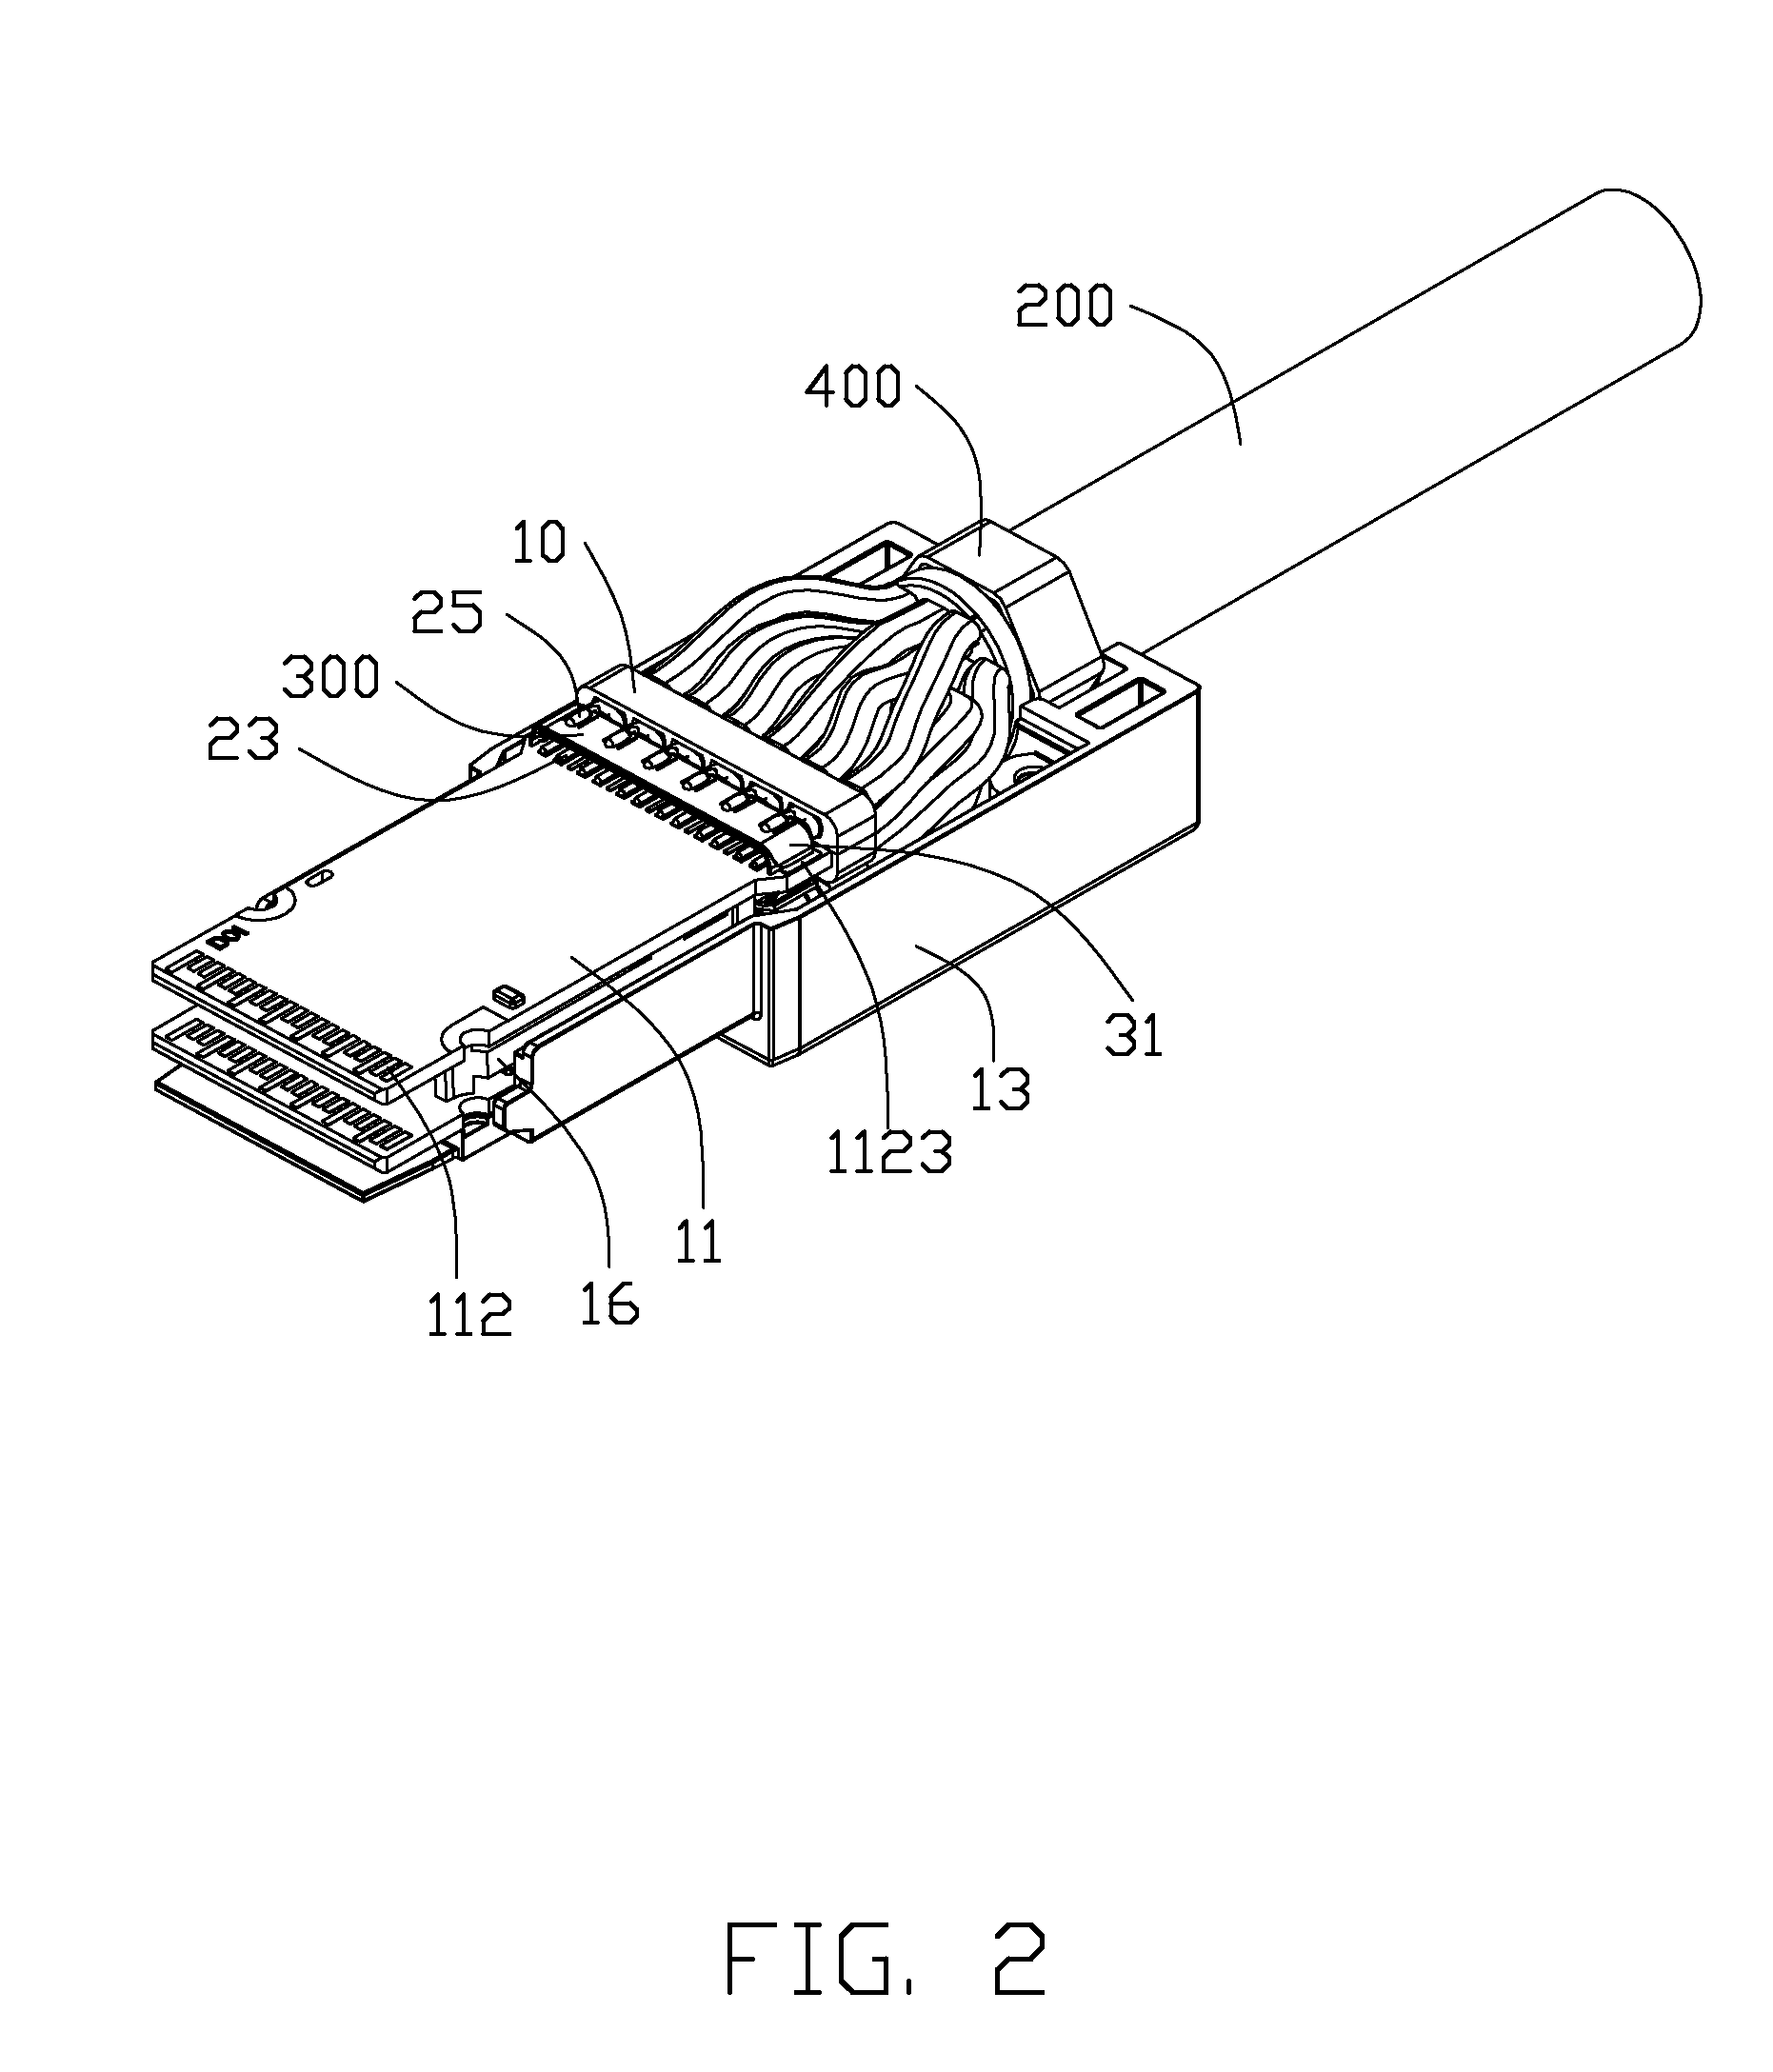 Cable connector assembly having an adapter plate for grounding